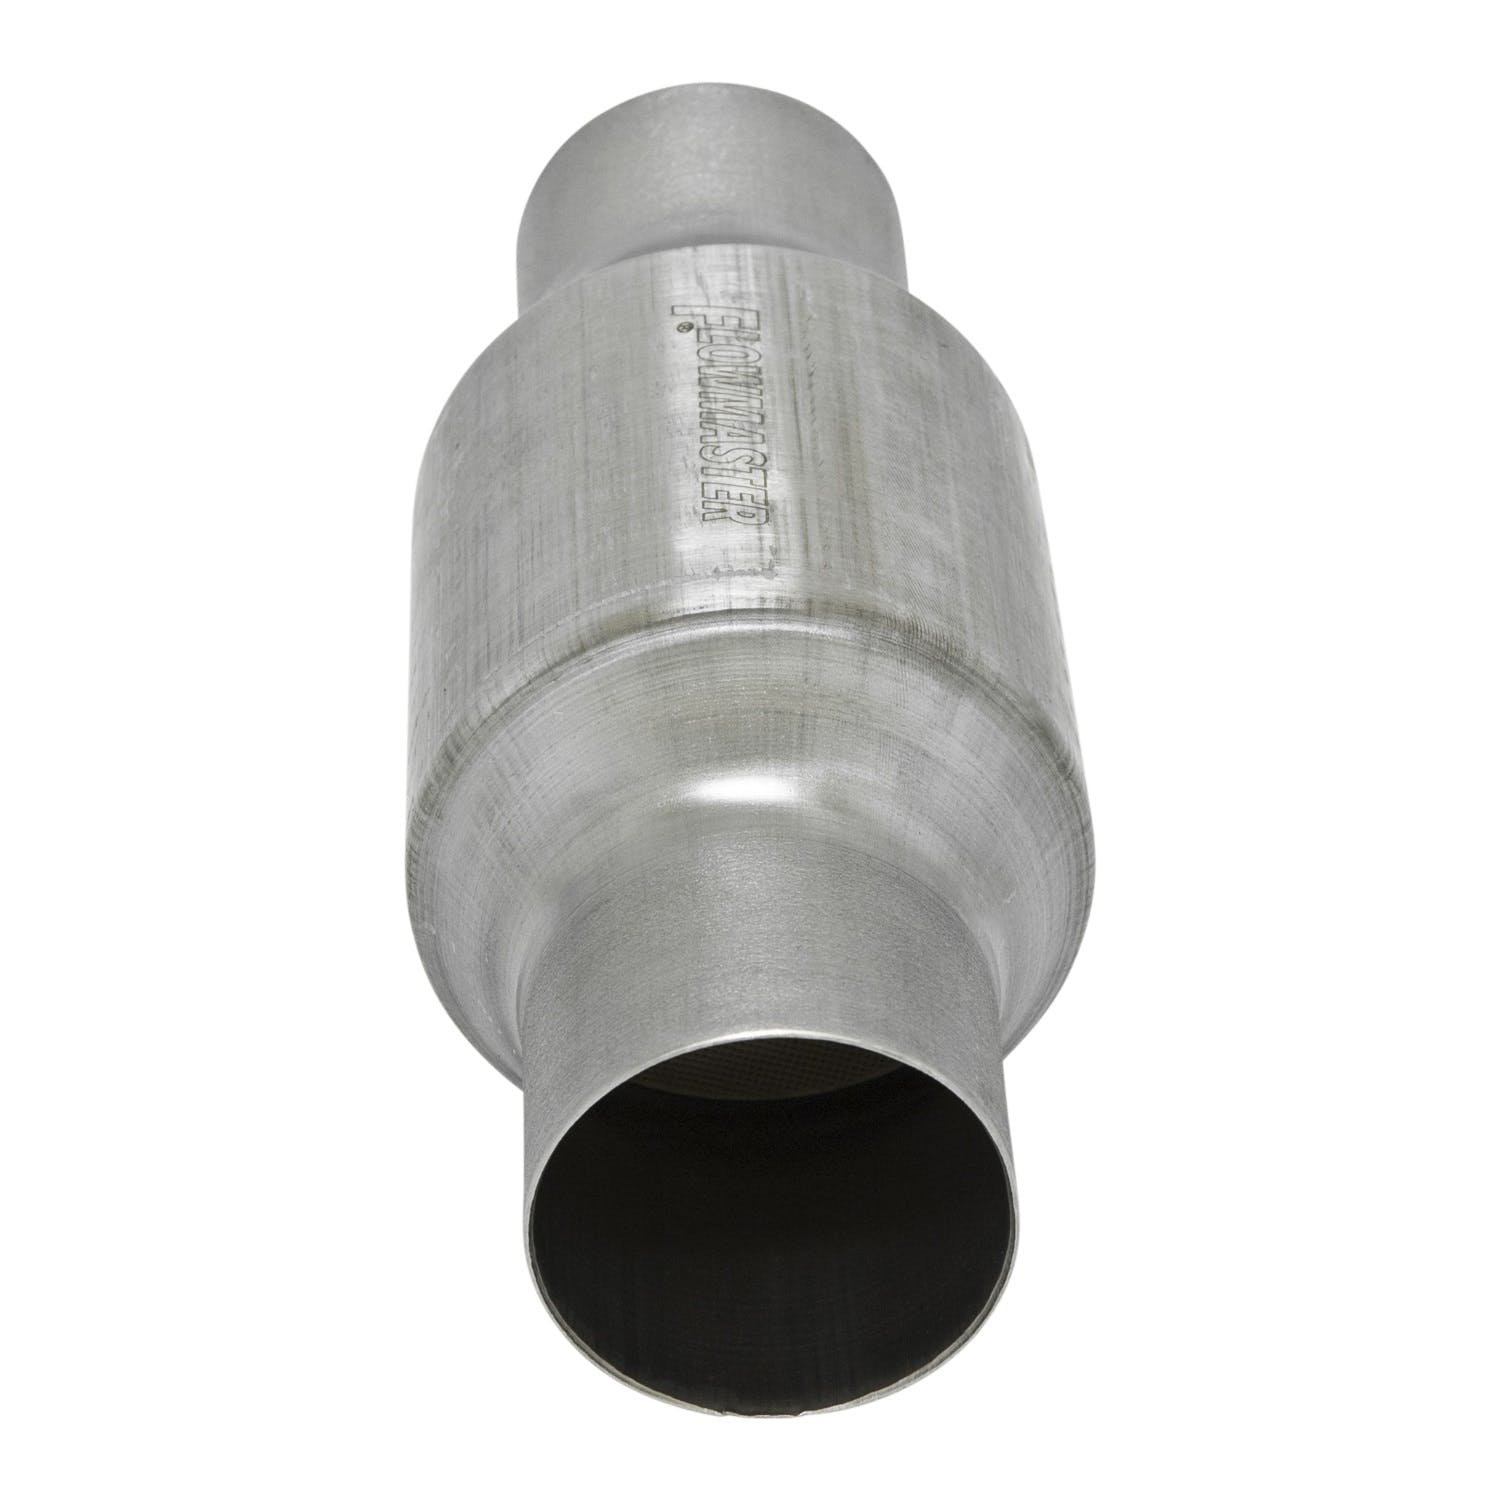 Flowmaster Catalytic Converters 2230130 Catalytic Converter-Universal-223 Series-3.00 in. Inlet/Outlet-49 State